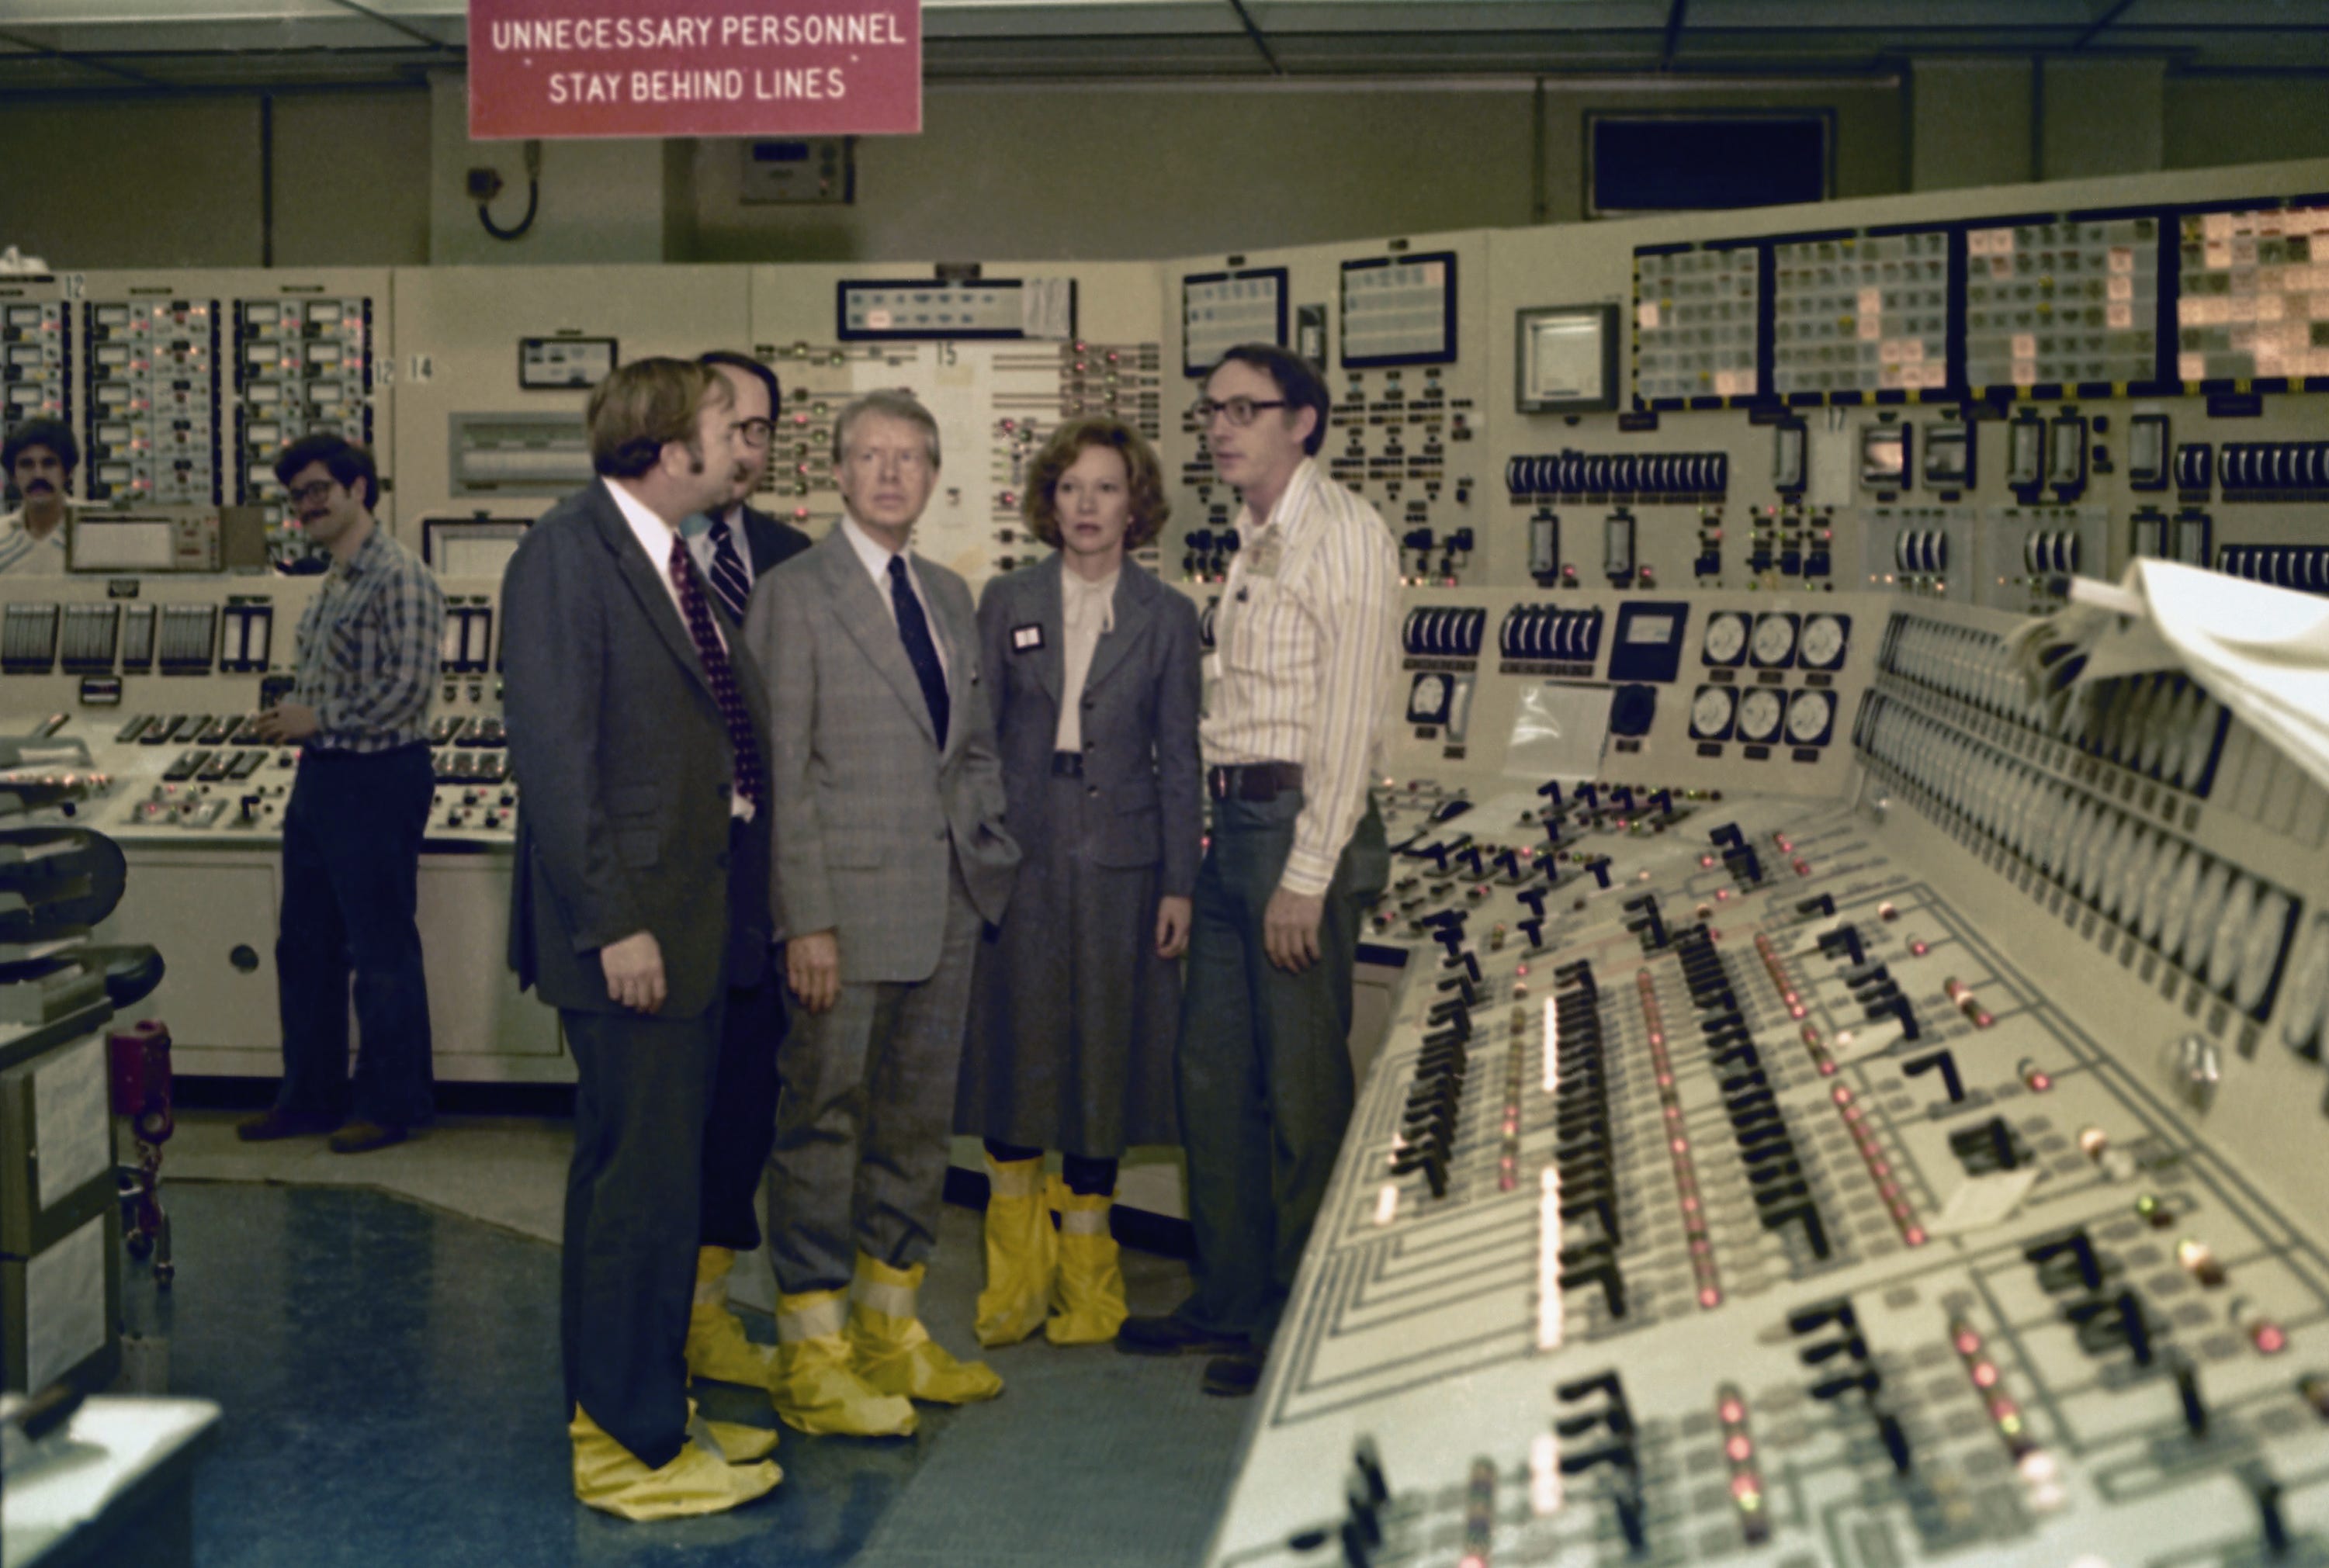 U.S. President Jimmy Carter shown  April 1, 1979 in the control room of the Three Mile Island nuclear power plant in Middletown, Pa. Standing with Carter from left: Harold Denton, director of the U.S. Nuclear Agency; PA. Gov. Dick Thornburgh; Rosalyn Carter; and an unidentified control room employee. (AP Photo)